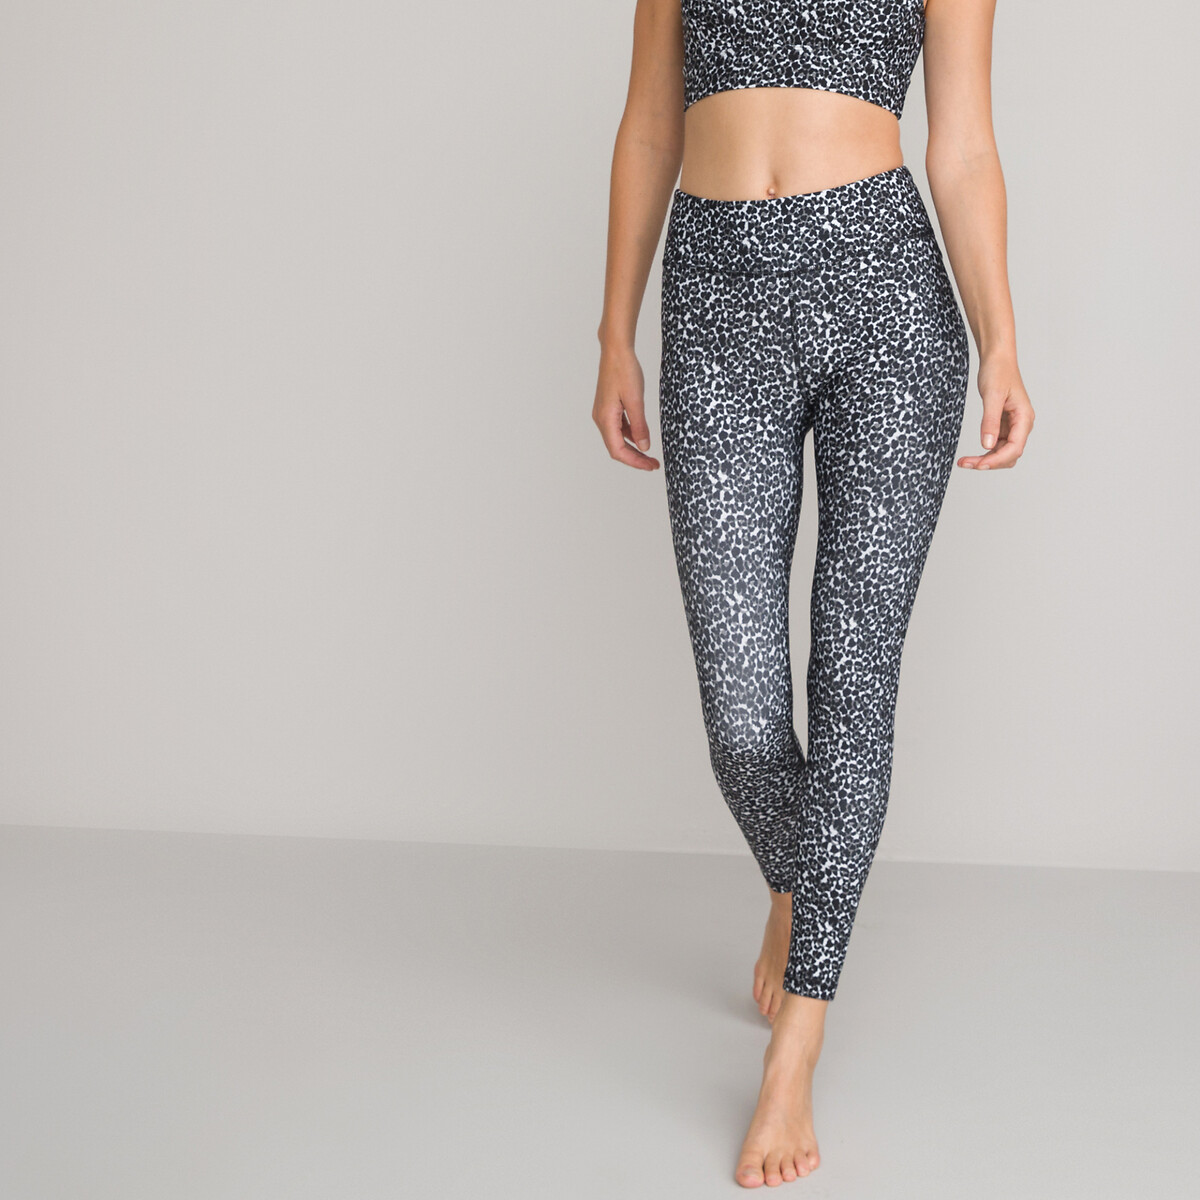 Gym Sports Leggings in Leopard Print with High Waist